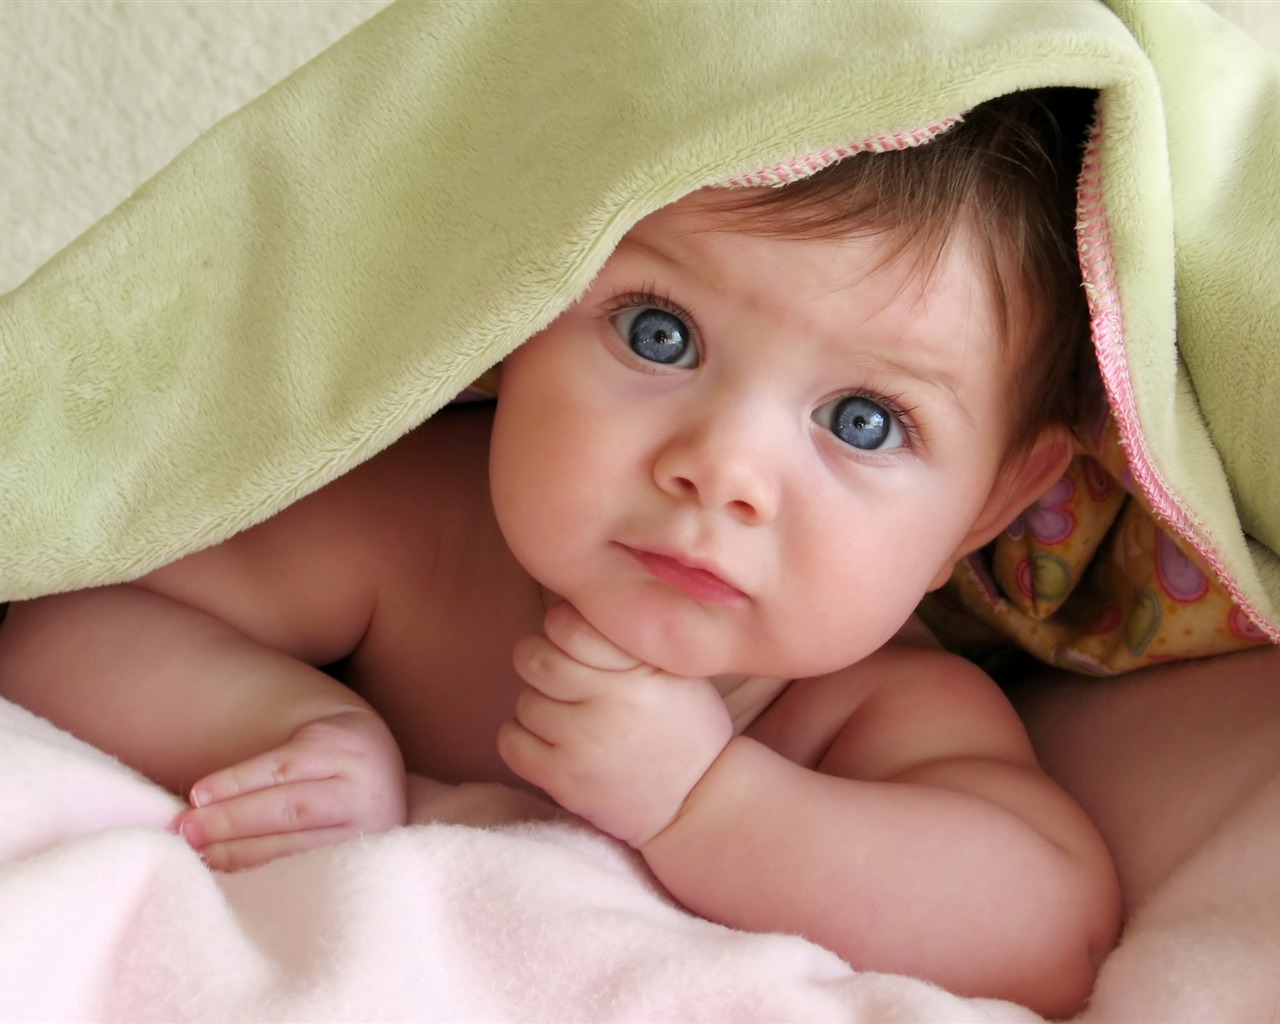 Cute Baby Wallpapers (3) #20 - 1280x1024